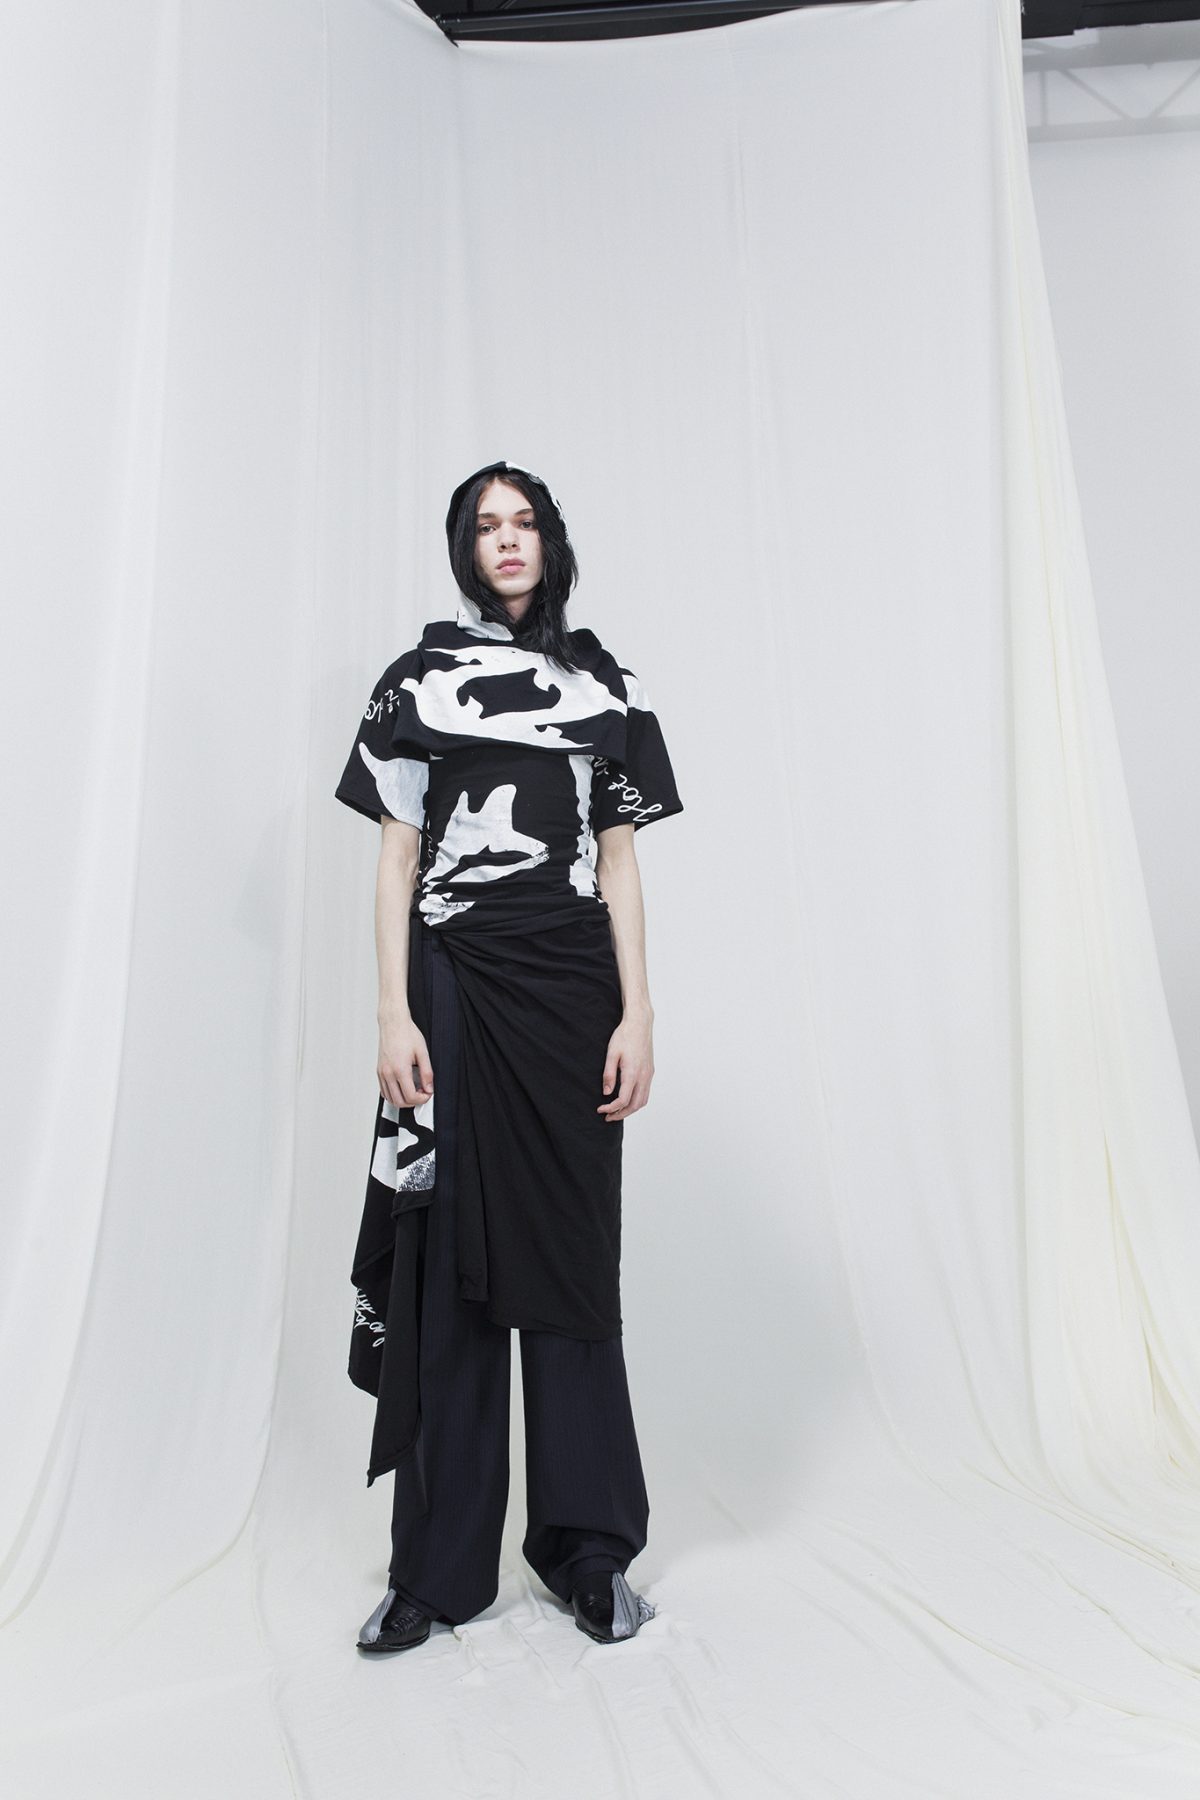 Model wearing a Black & white hooded dress with t-shirt sleeves